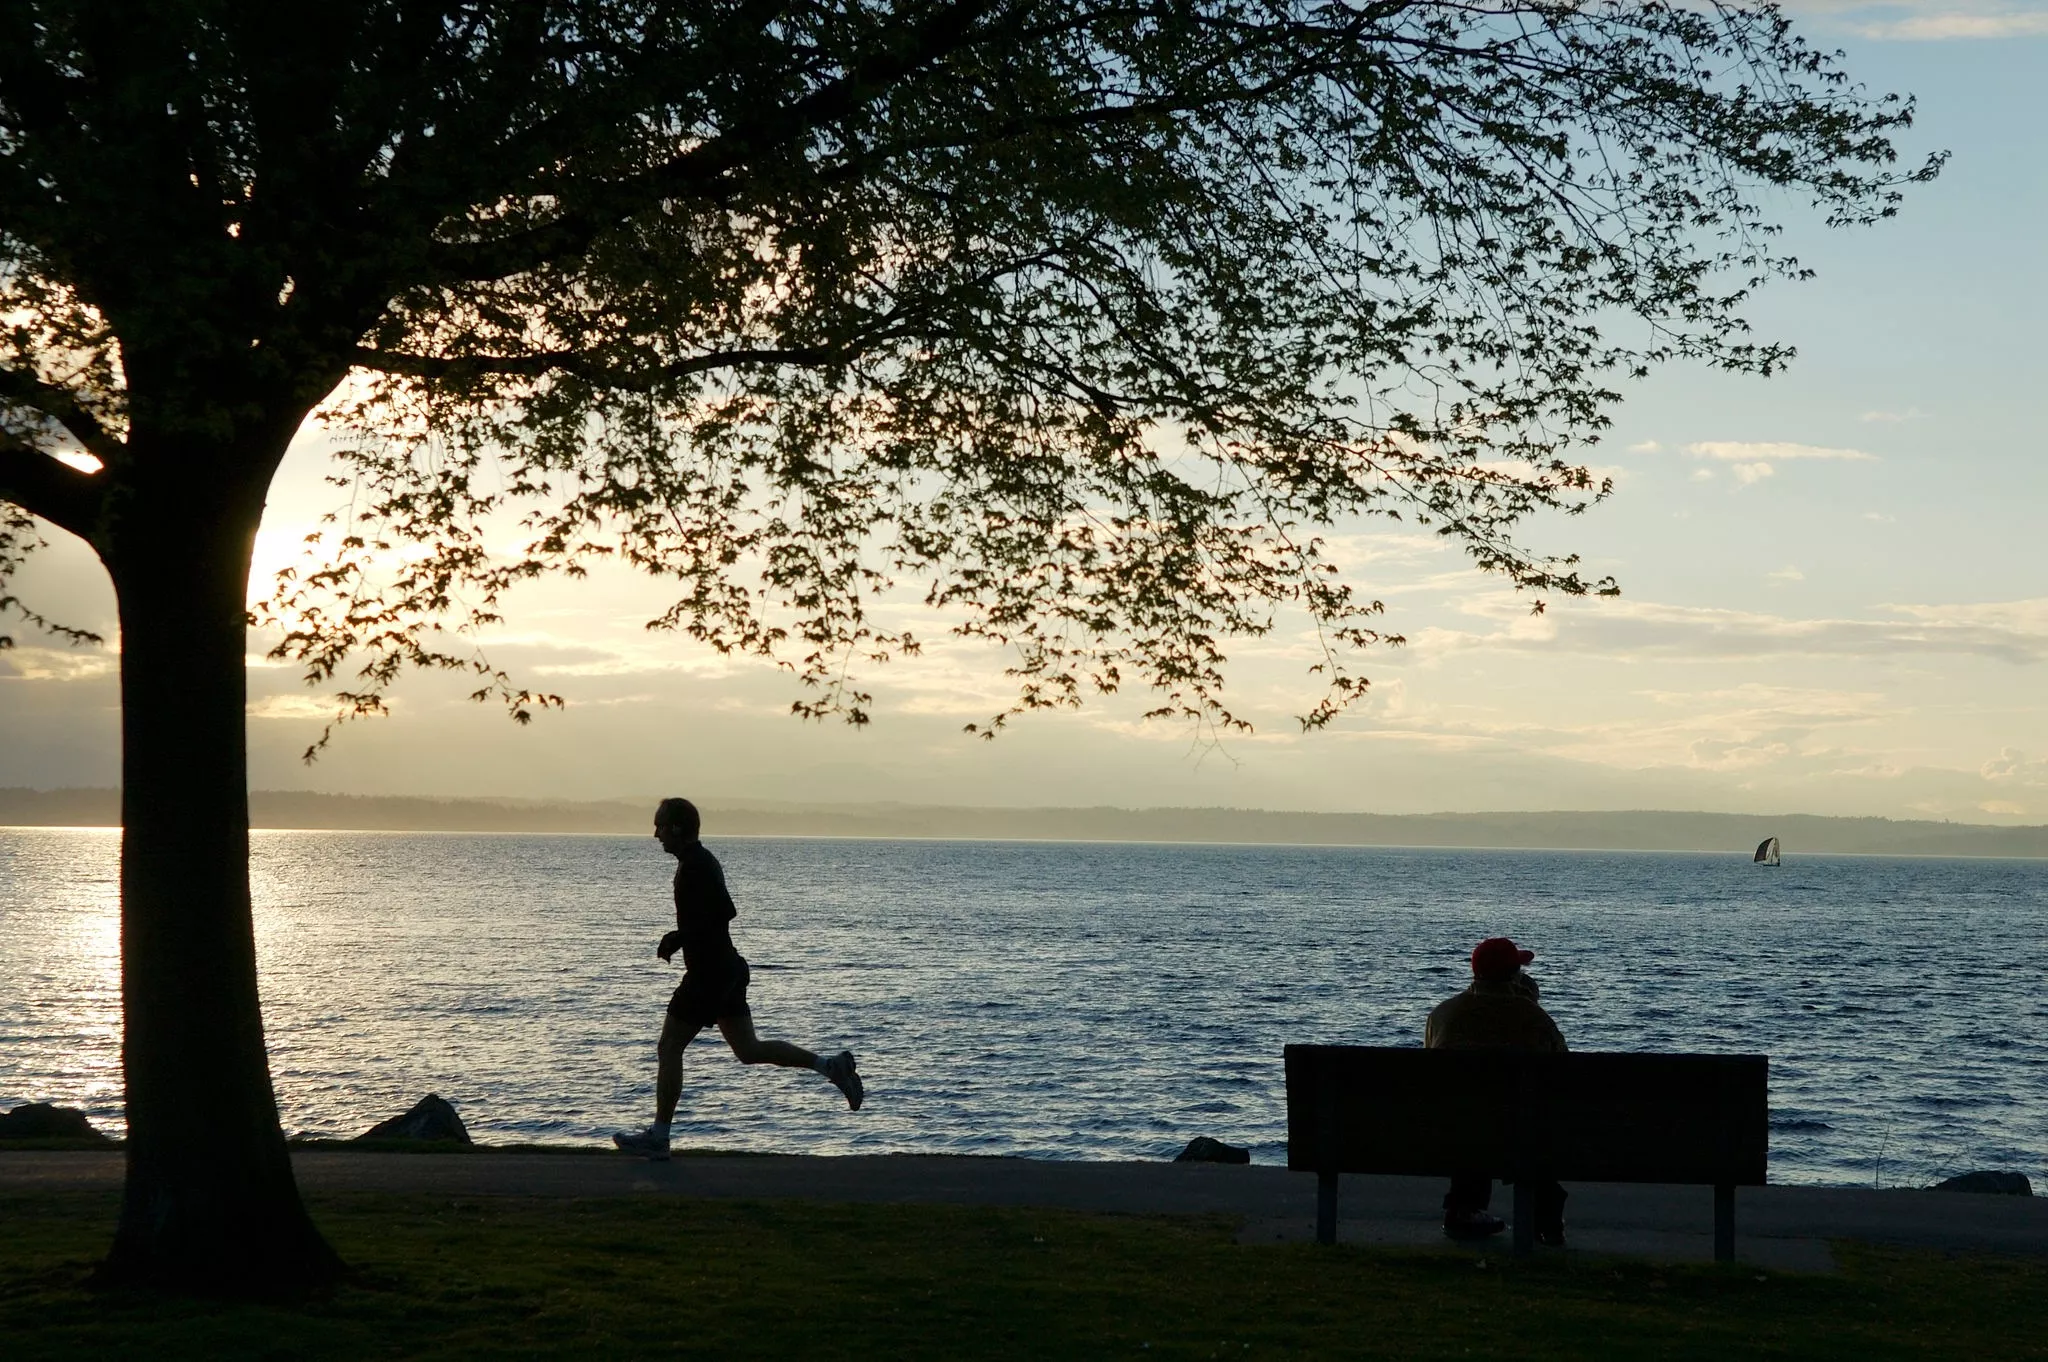 Golden Gardens Park in USA, North America | Parks - Rated 4